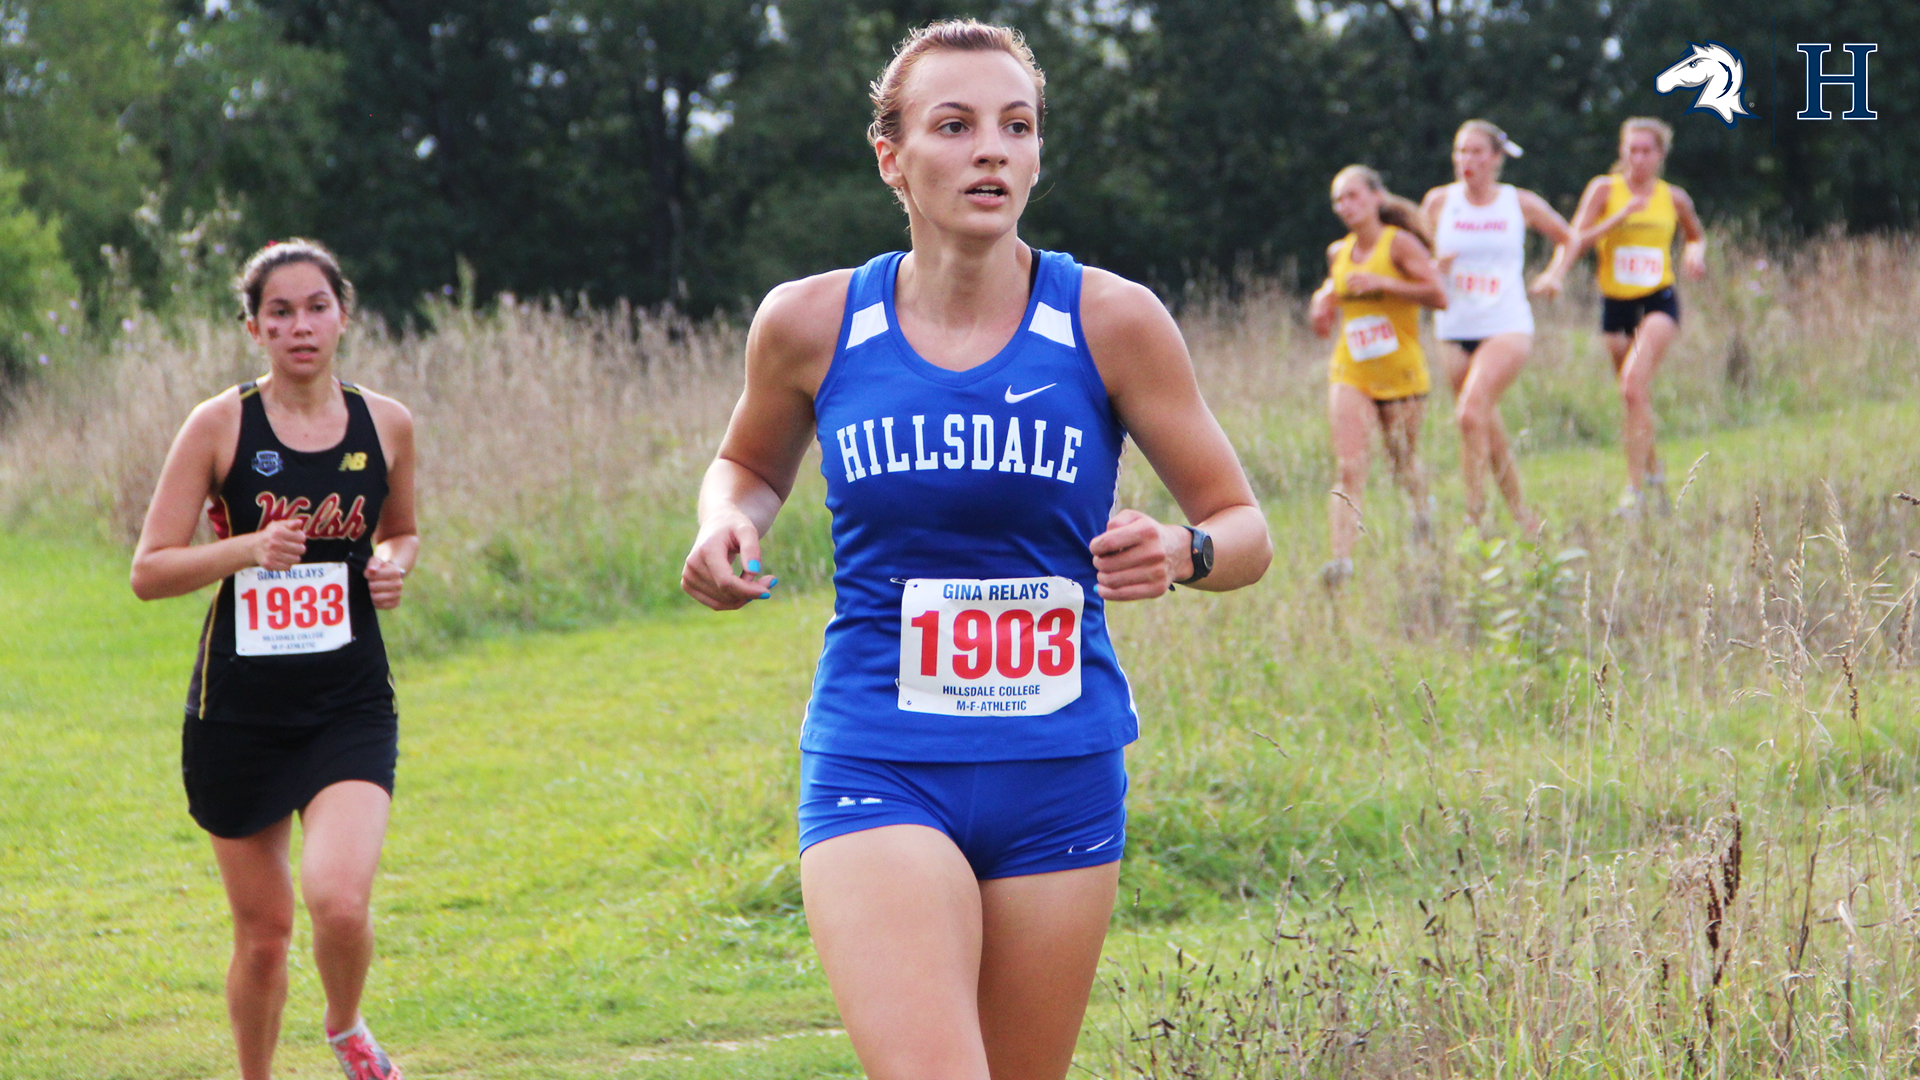 Two top ten finishers help Charger women's cross country team take fourth at Calvin Invite